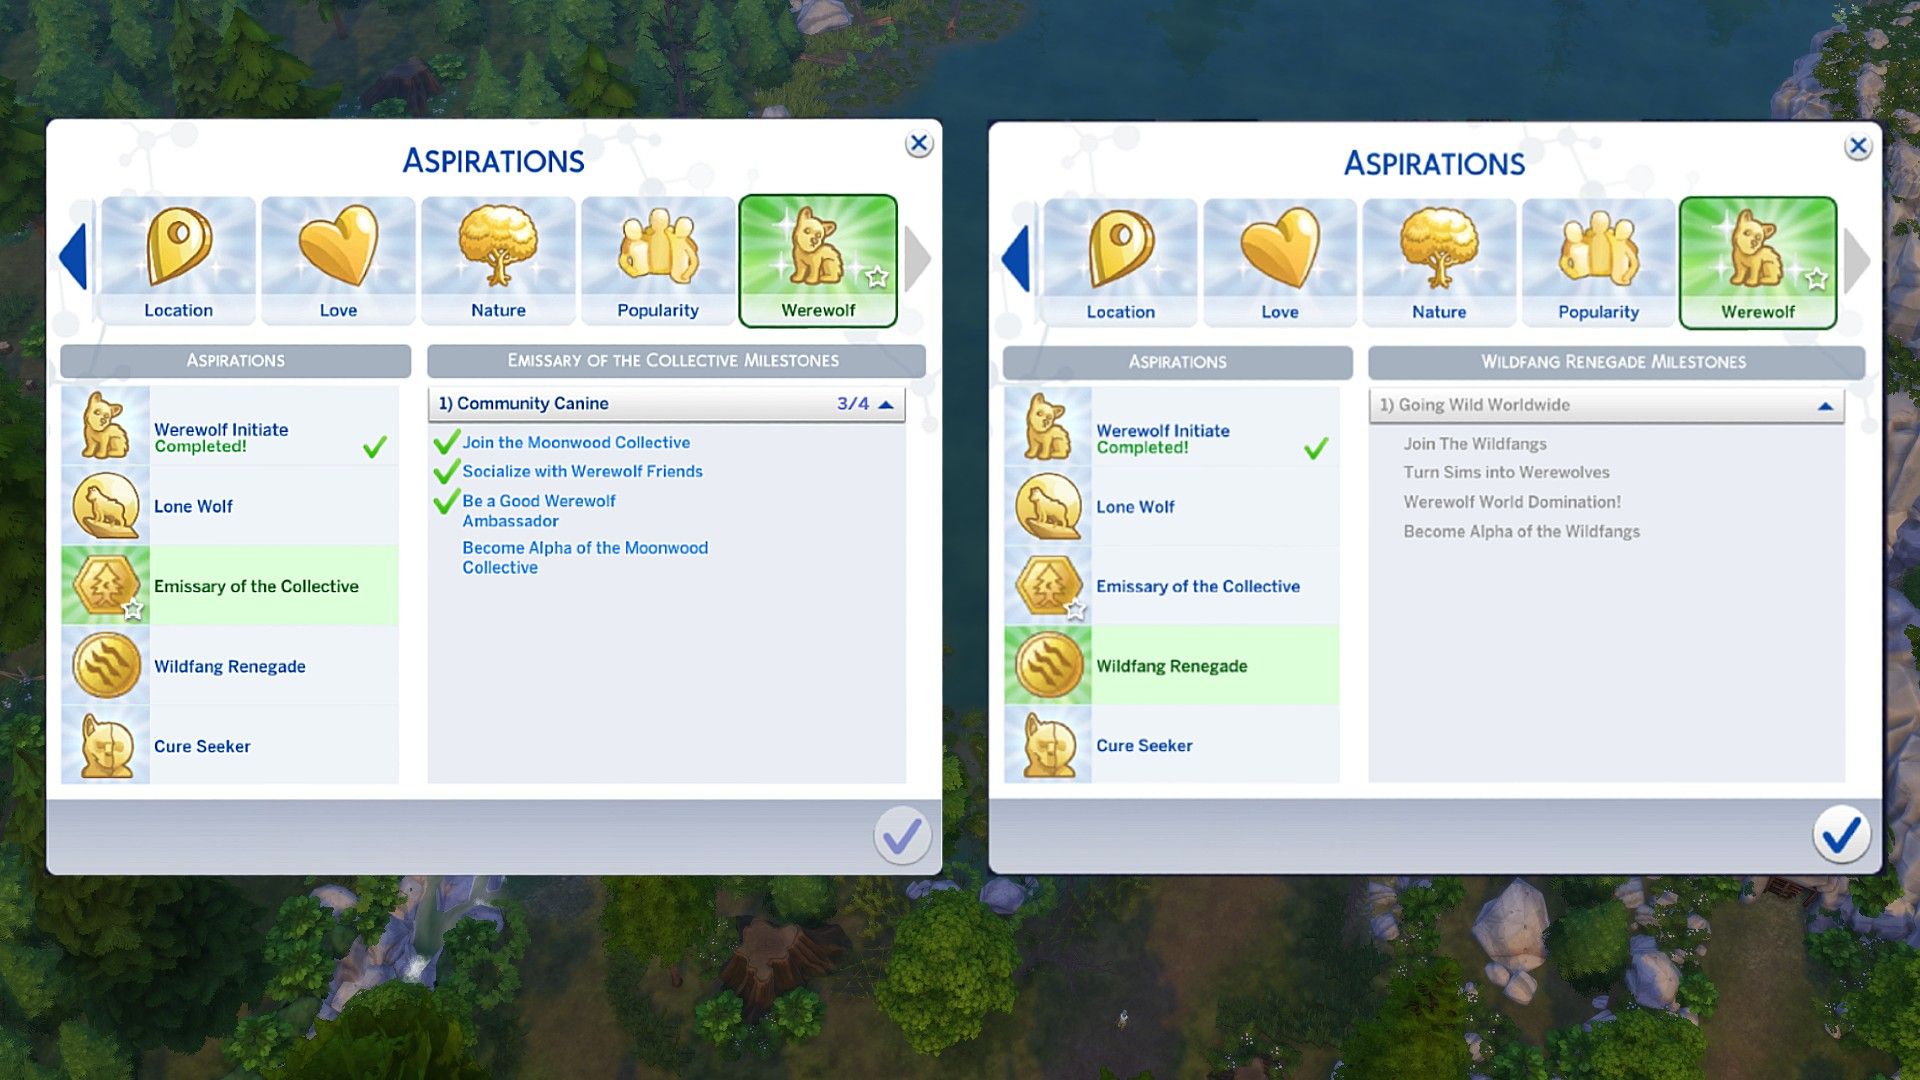 The two branches of the Werewolf Aspiration for both packs in The Sims 4 Werewolves